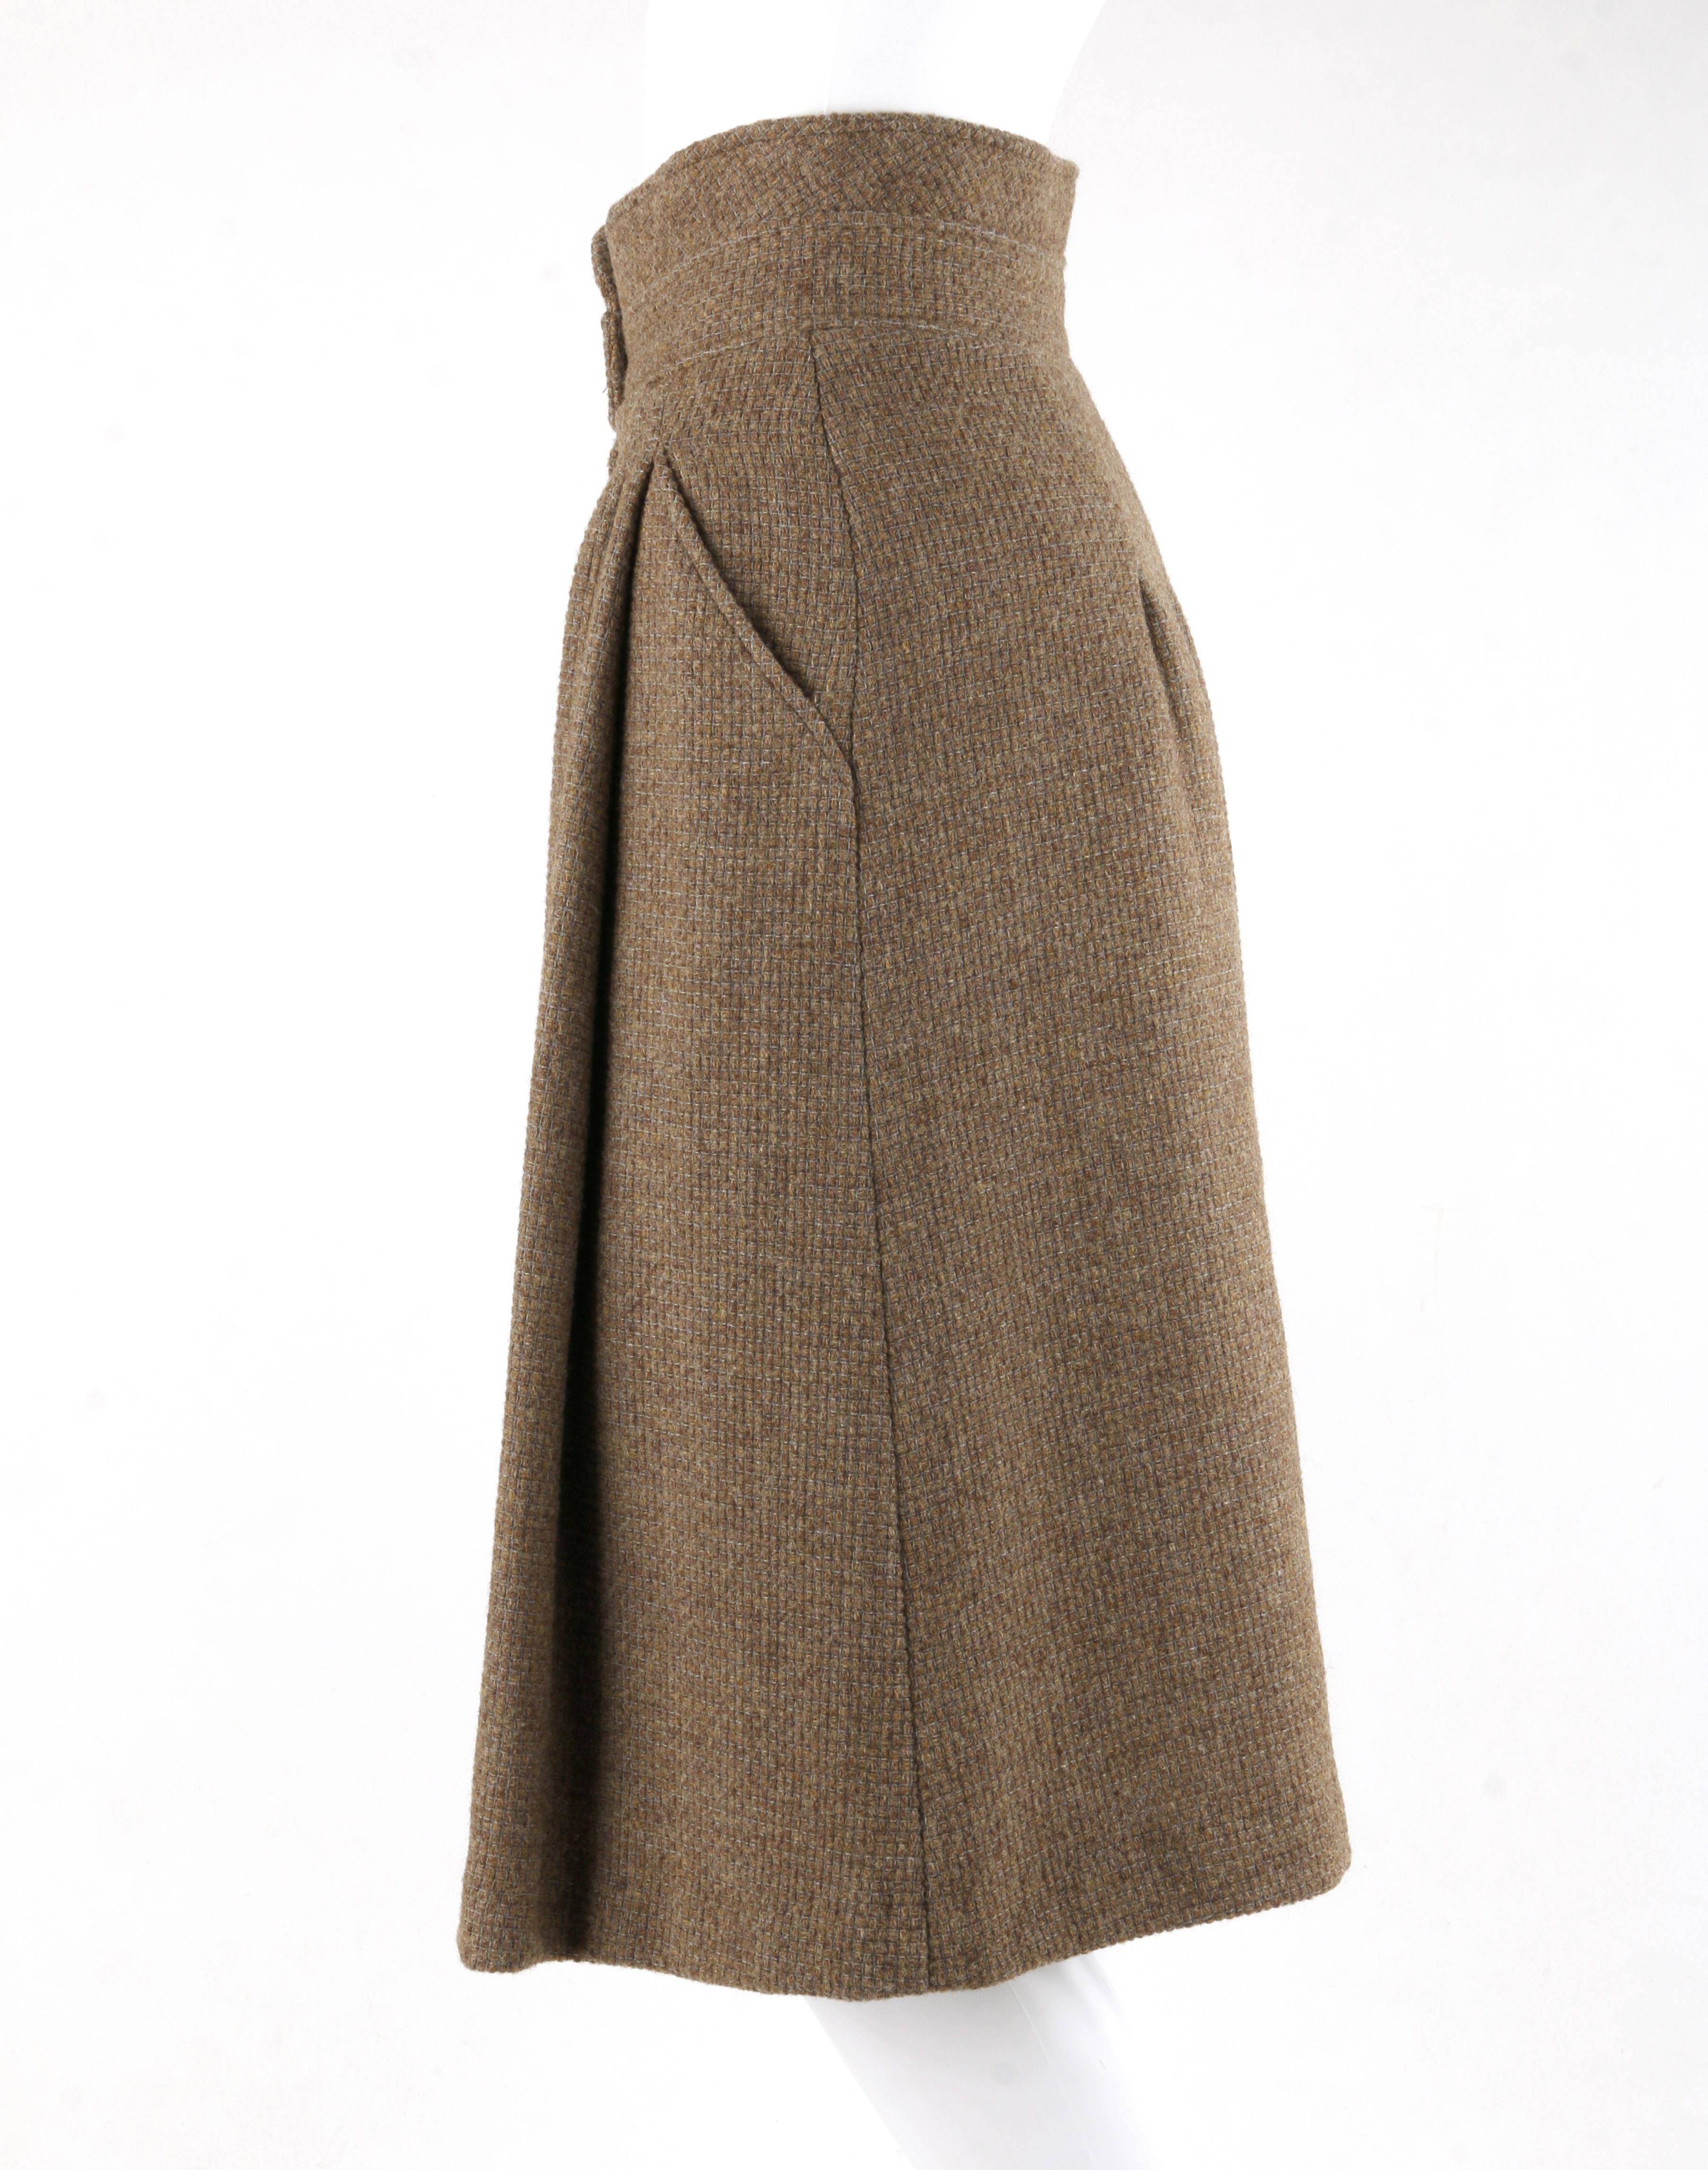 Women's GIORGIO ARMANI c.1980’s Brown Tweed High Waisted Pleated Fit Flare A-Line Skirt 